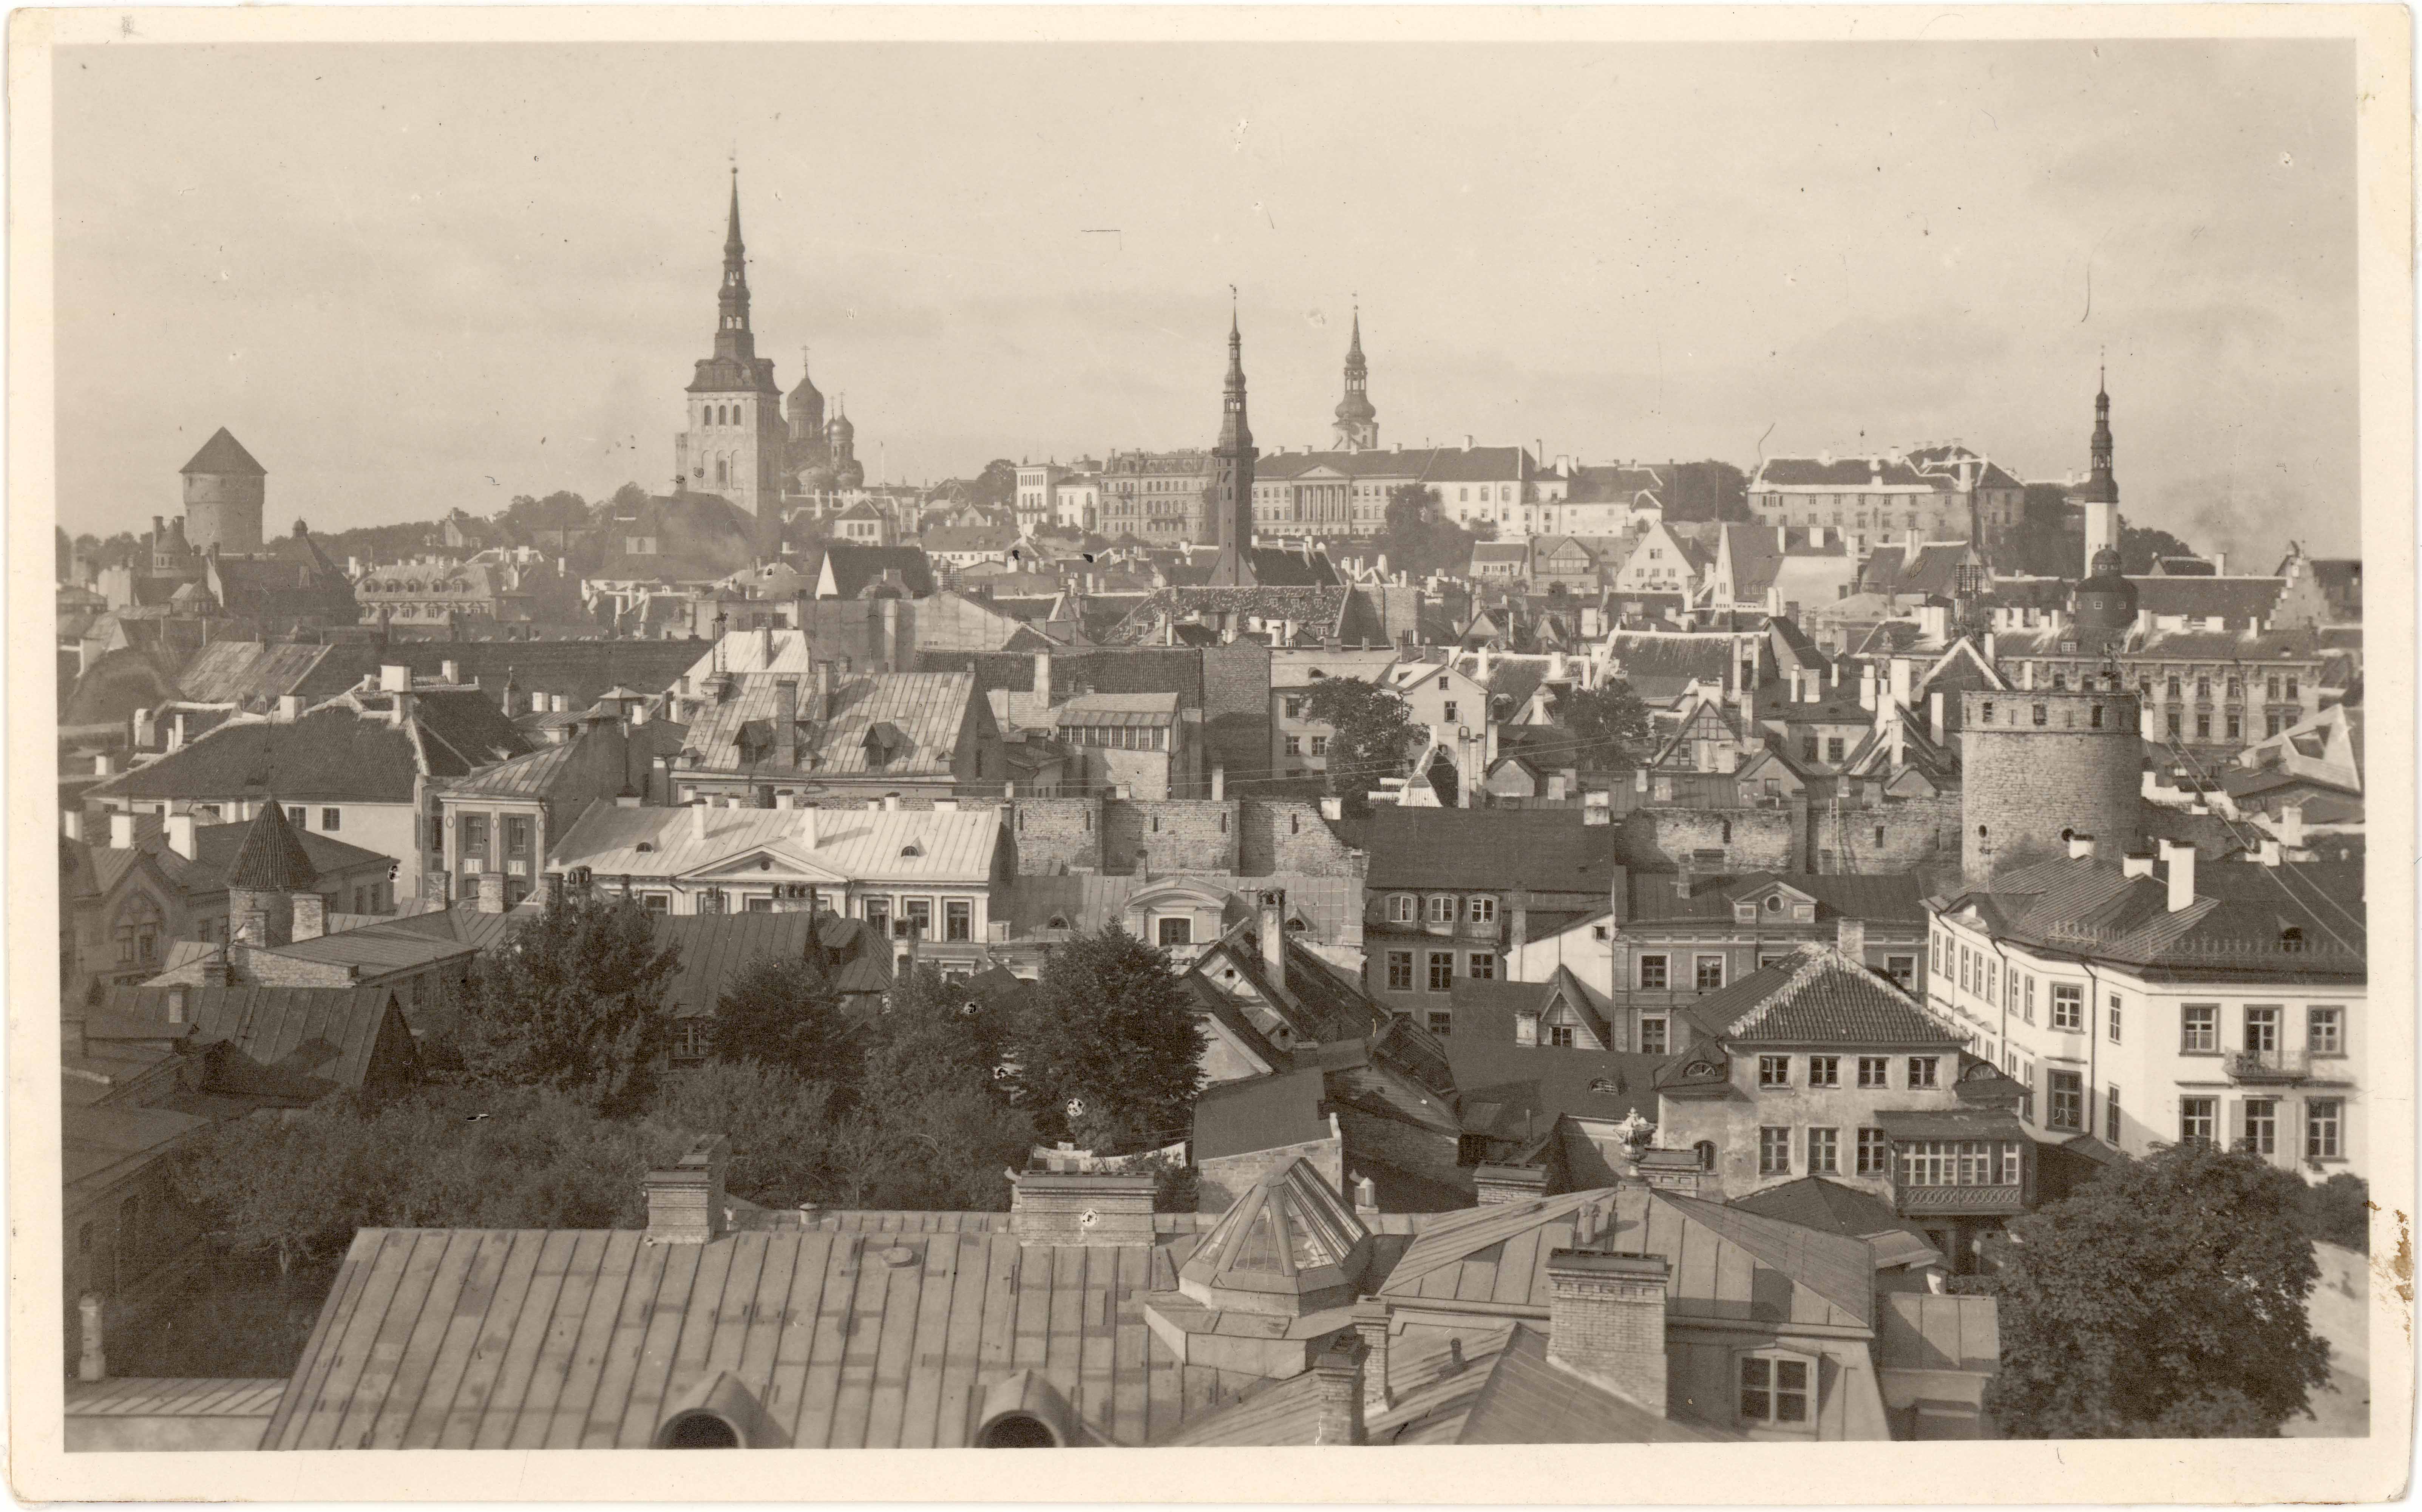 View of the Old Town and Toompea O from the Pritsumaja Tower. On the front of the New Street section from Viru gates to Helleman Tower. 1920-1930s